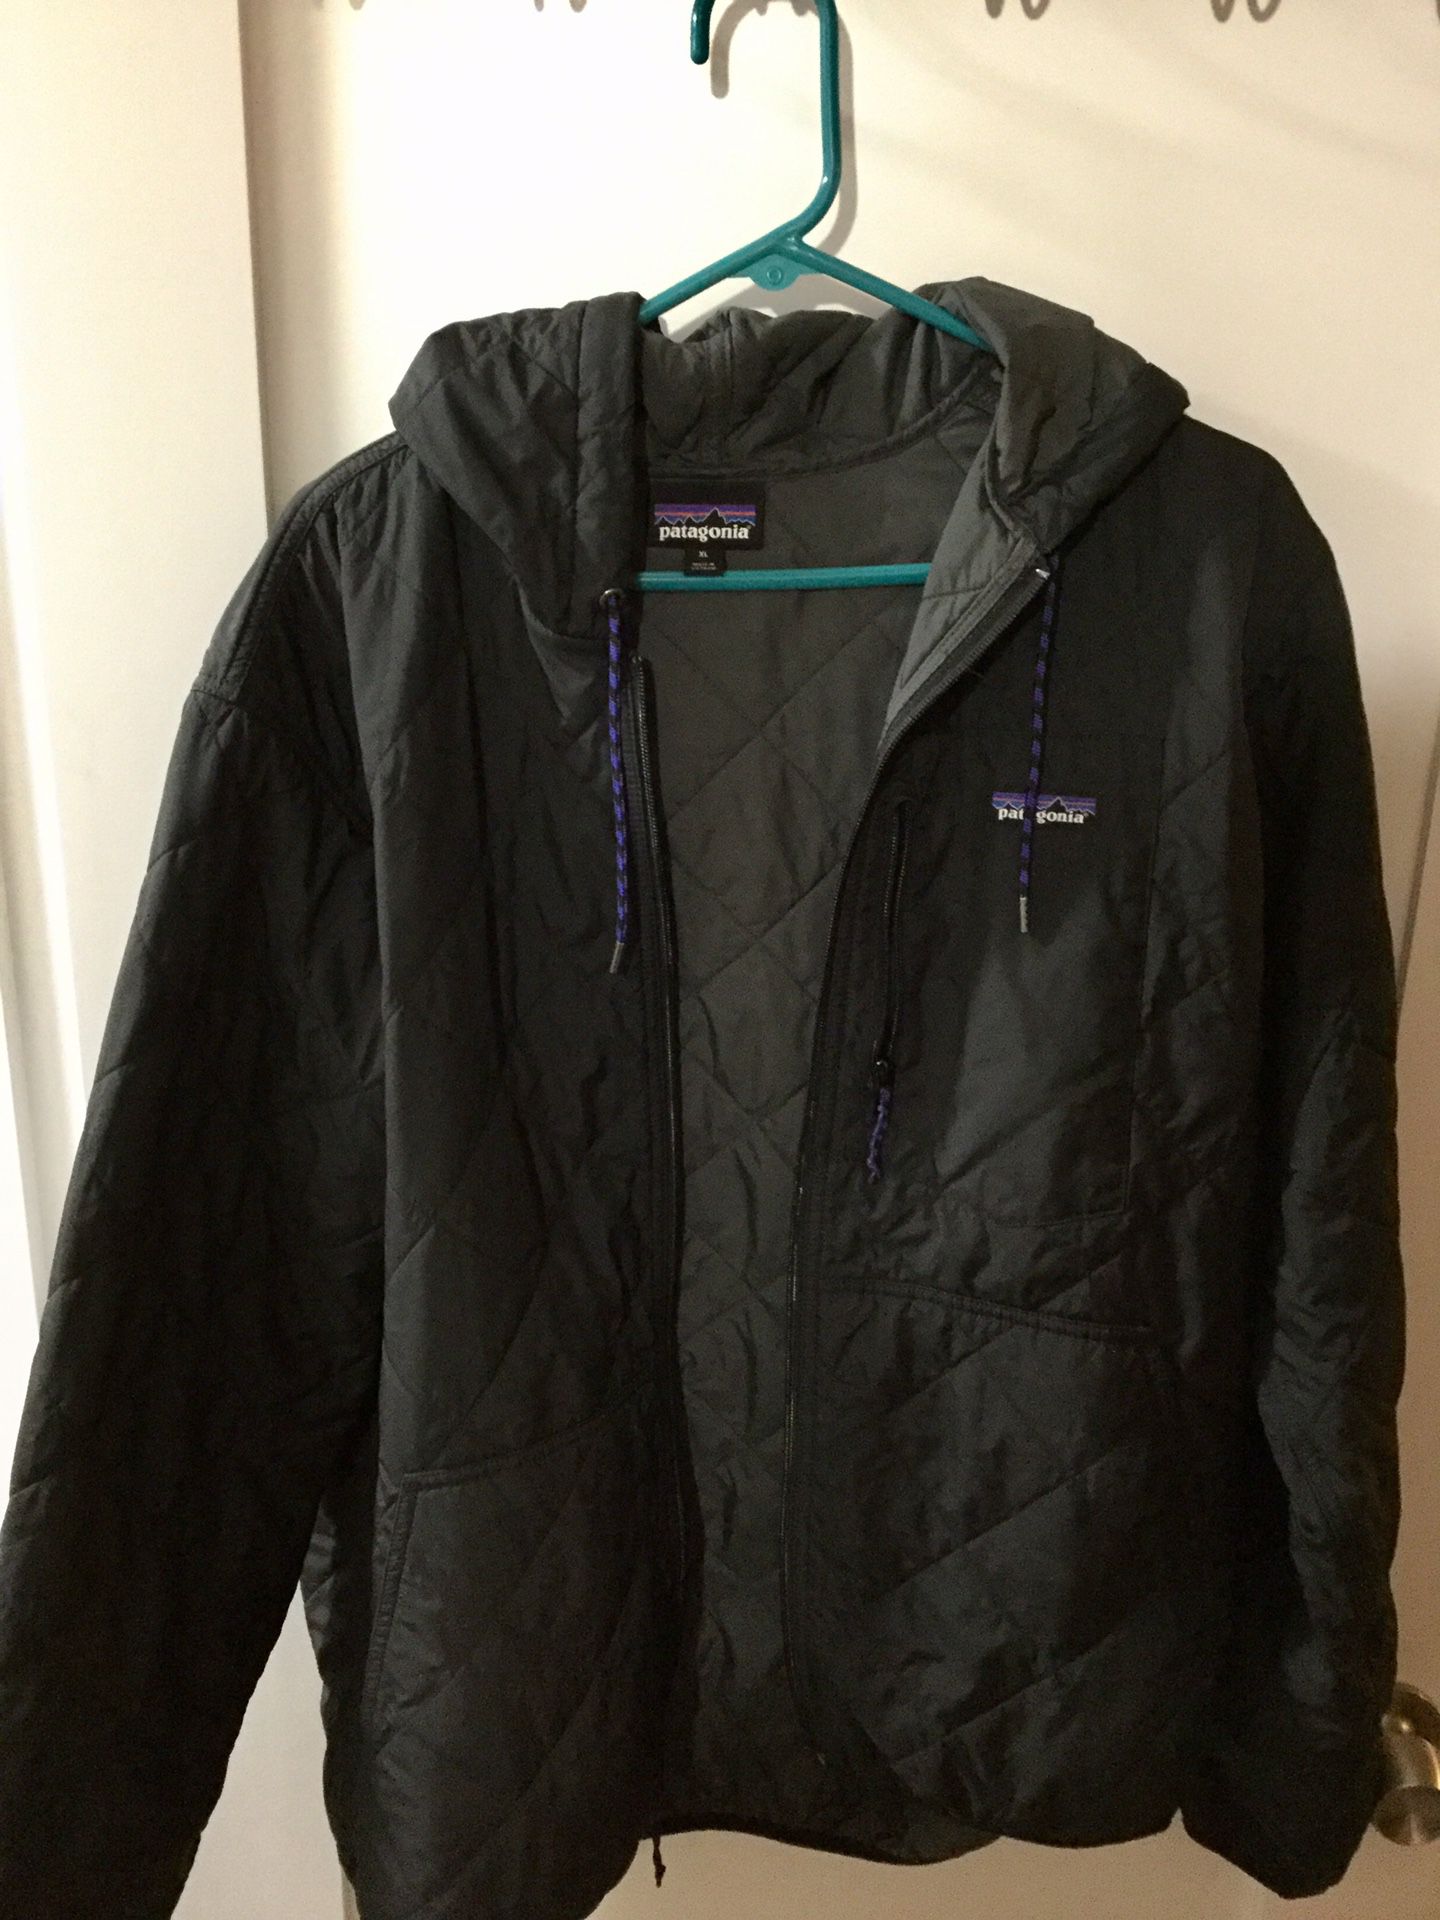 Patagonia Diamond Quilted Bomber hooded jacket